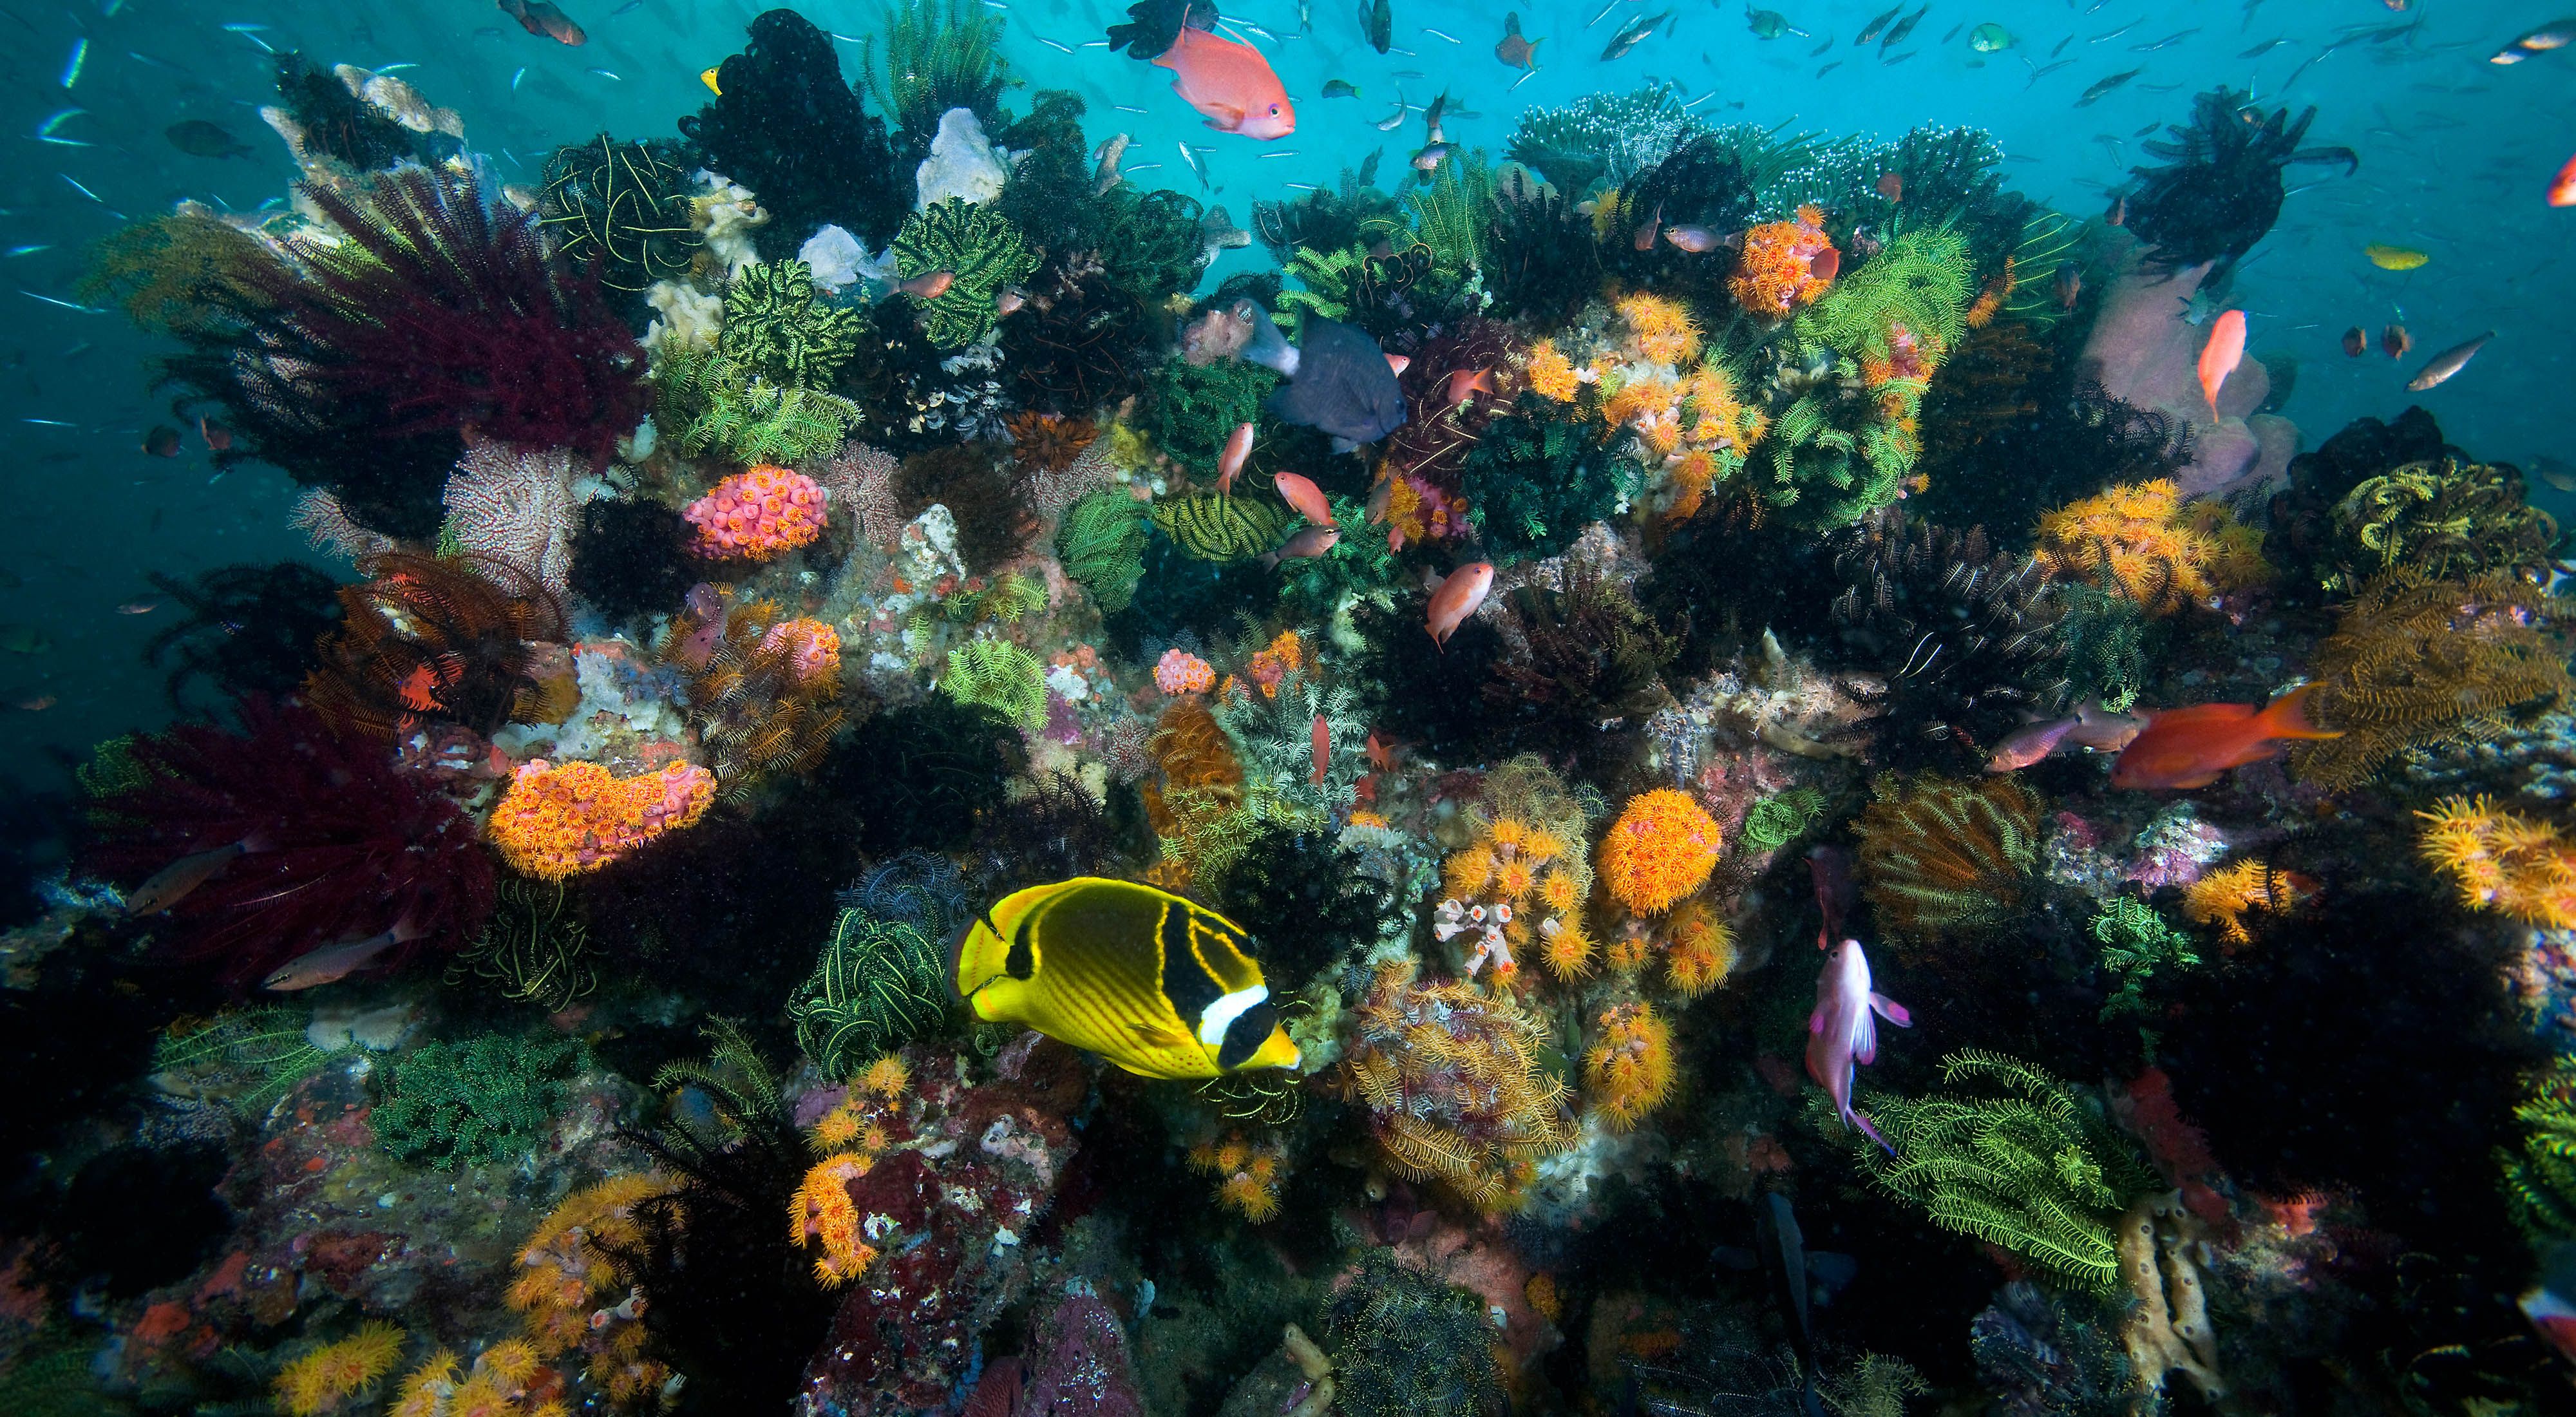 A coral reef teems with life in Rinca Island, Indonesia.